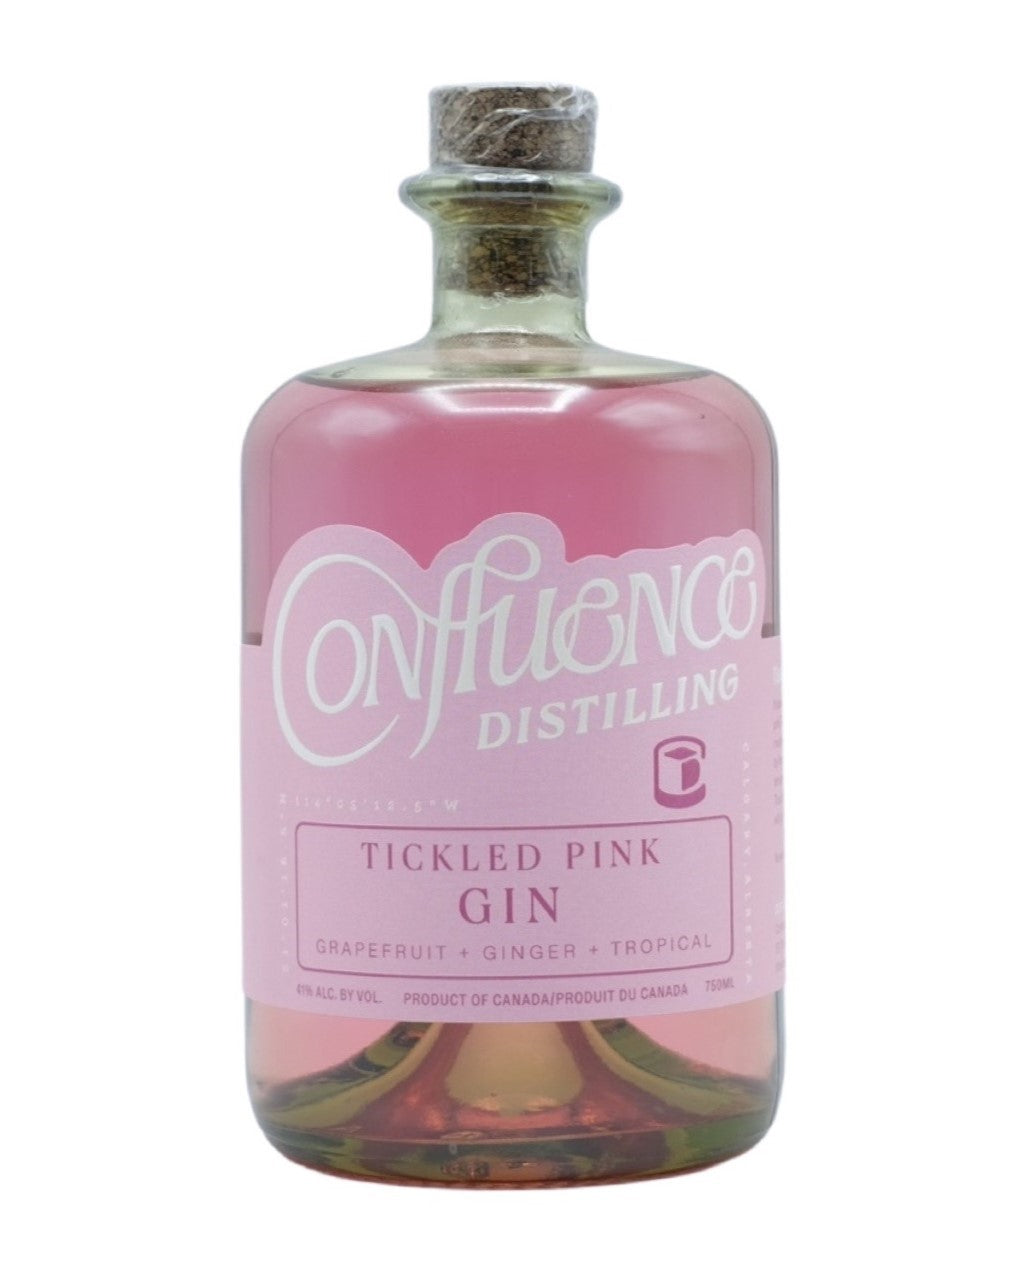 Confluence Pink Gin